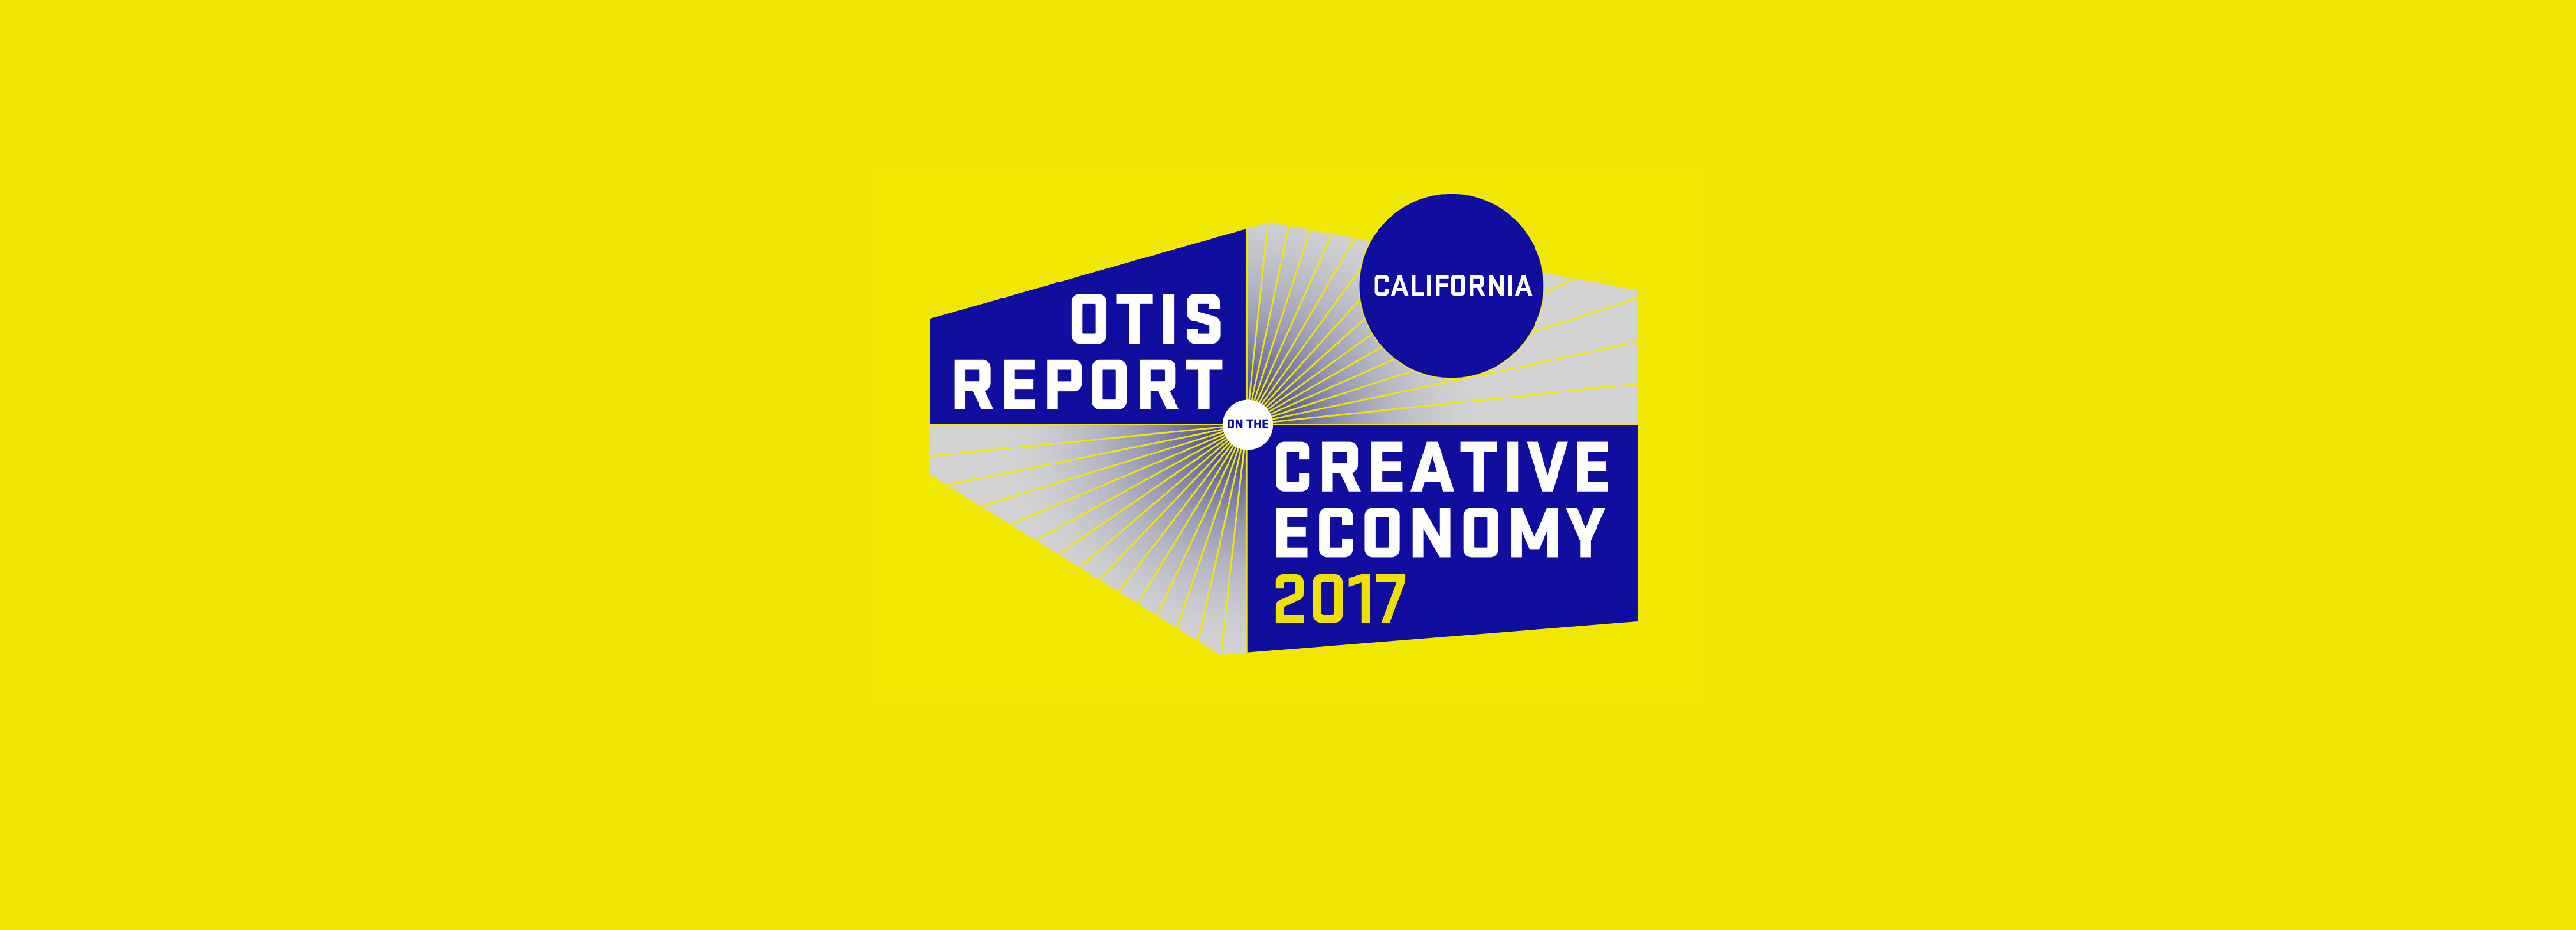 California S Creative Economy Is Booming And It S Our Duty To